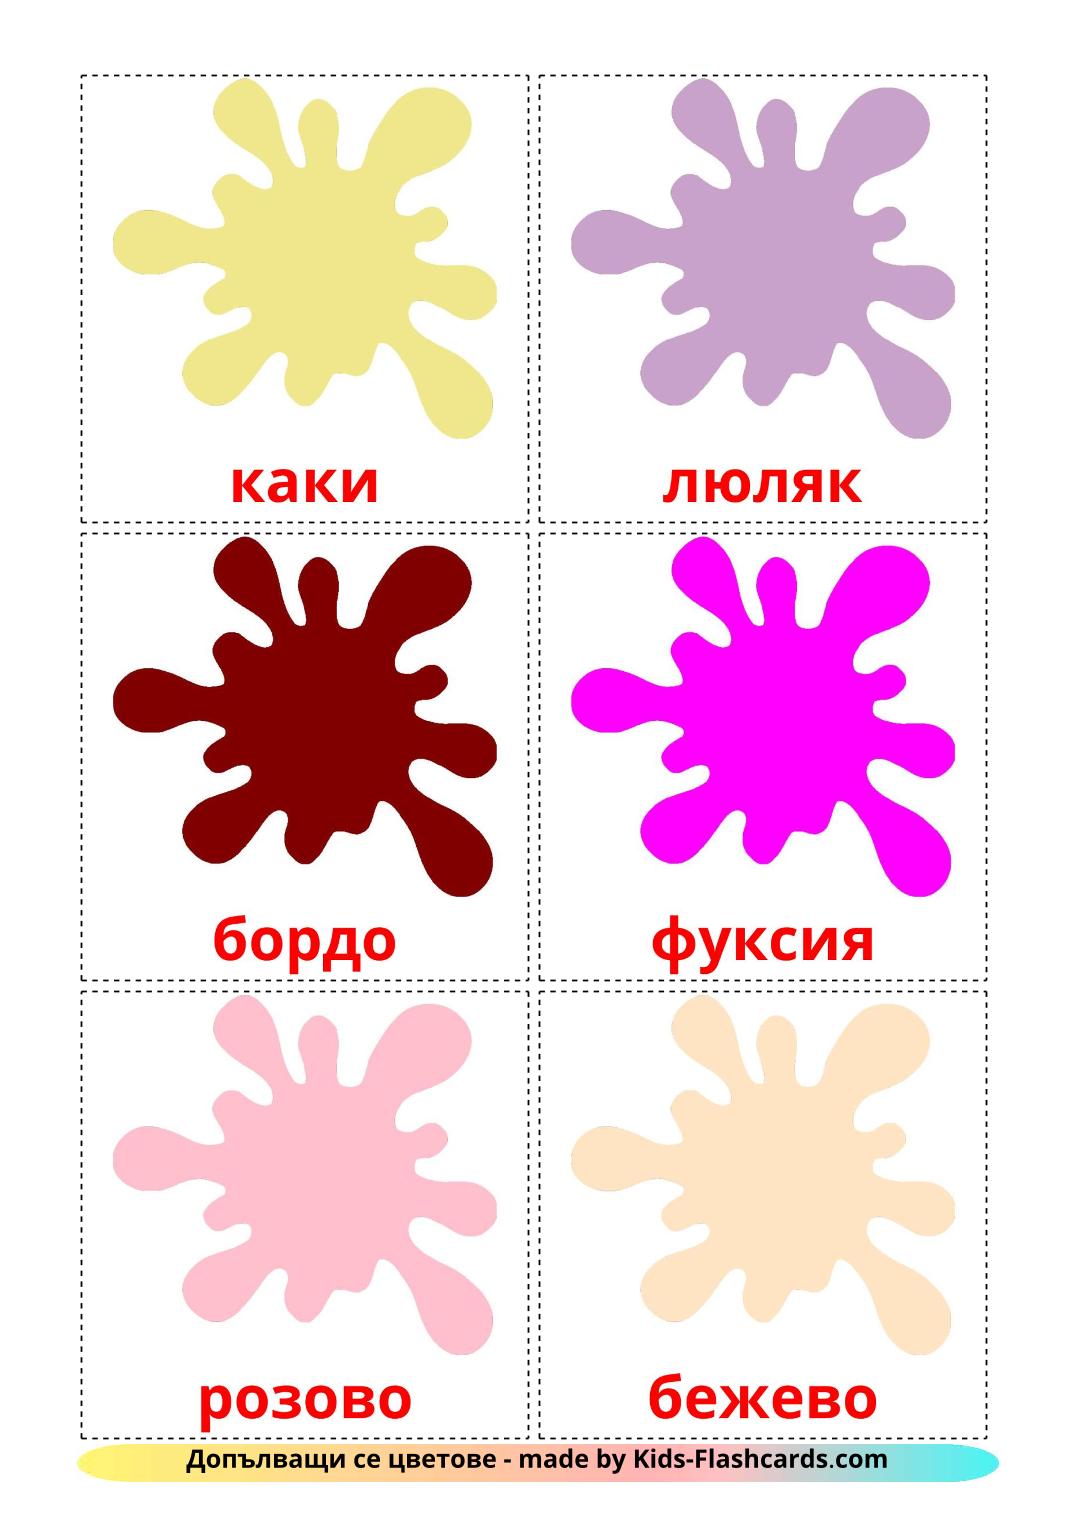 Secondary colors - 20 Free Printable bulgarian Flashcards 